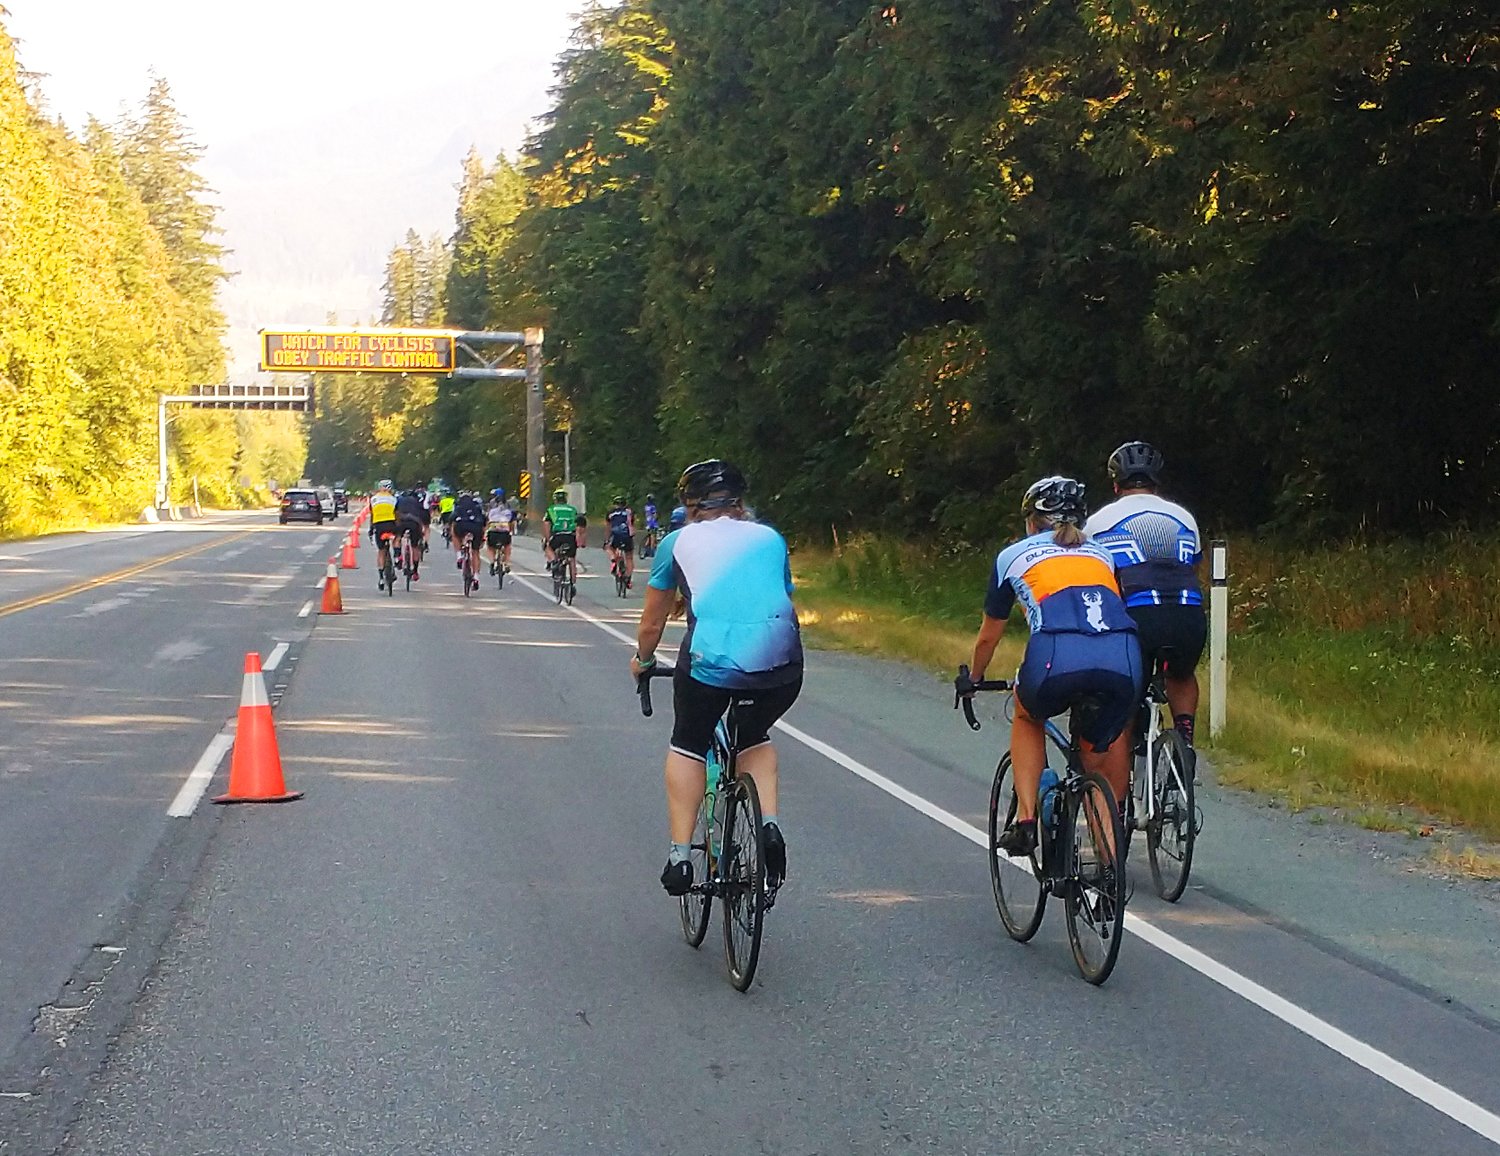 These weren't the head group.... Started at 7am and had done like 70-80km in 4-5 hours. COME ON GUYS, MOVE, MOVE lol.